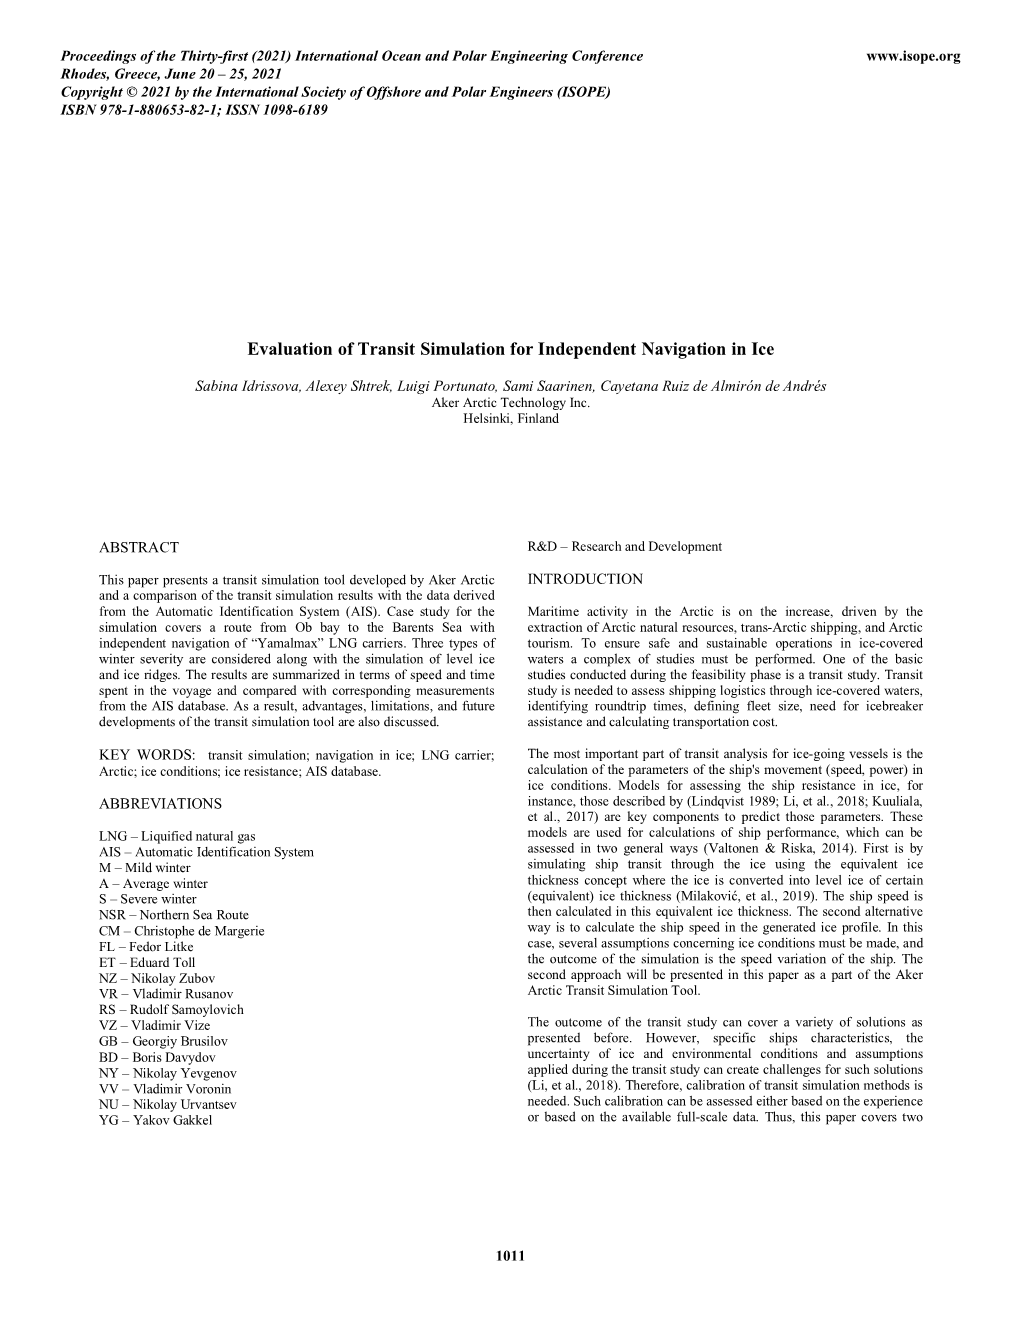 Evaluation of Transit Simulation for Independent Navigation in Ice